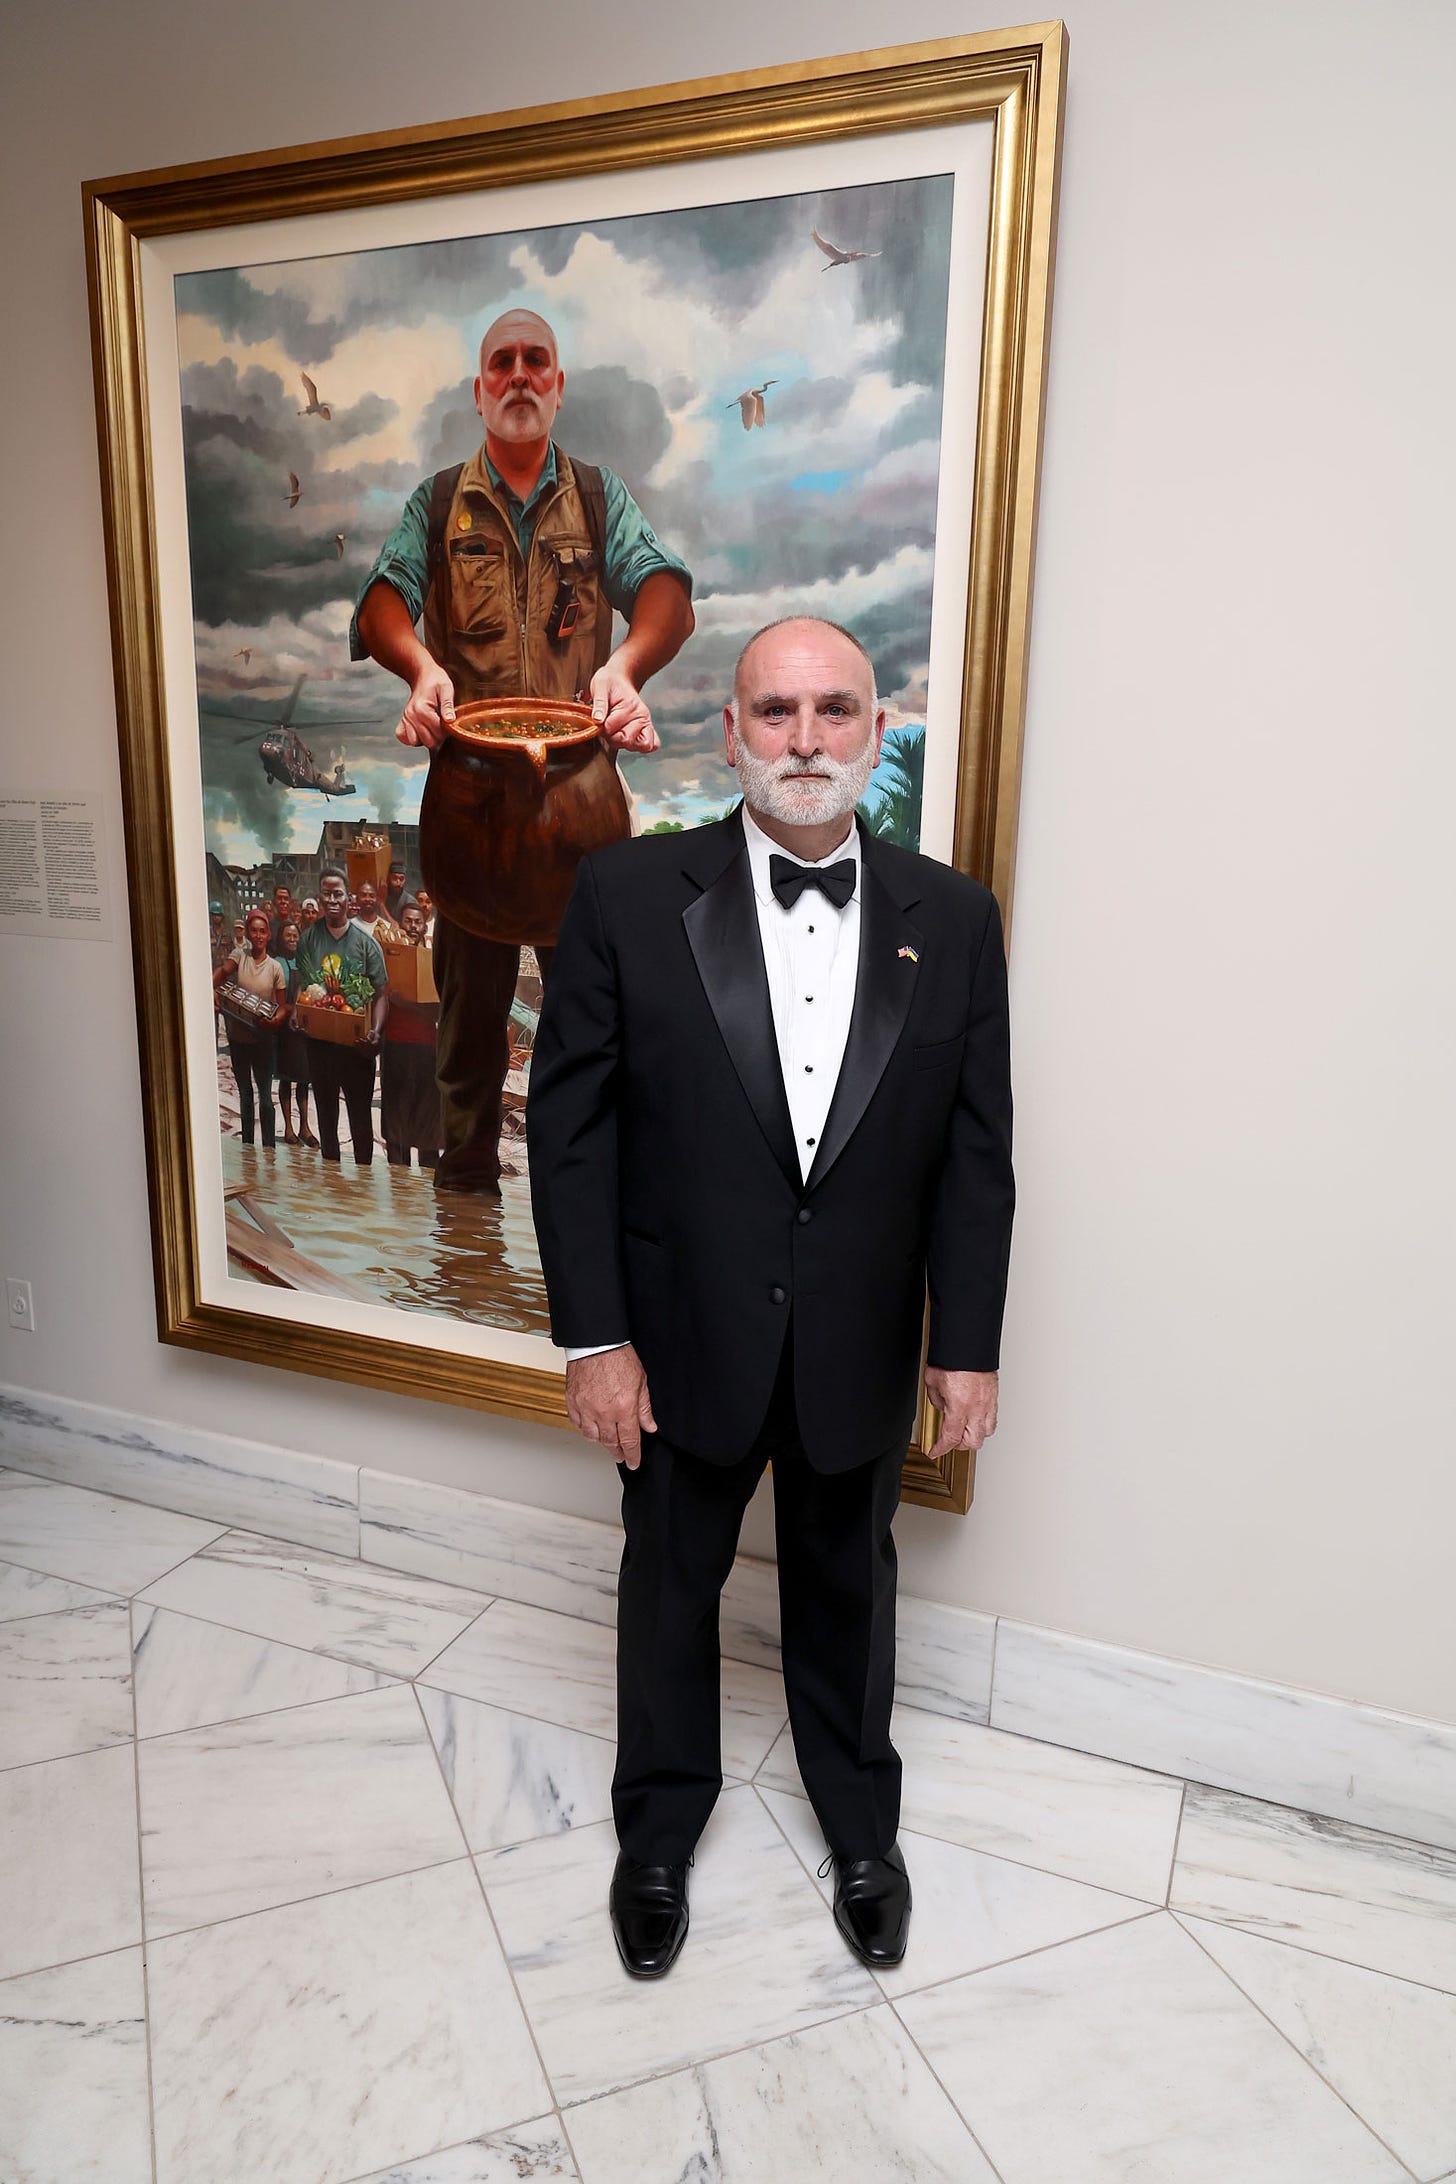 José Andrés at the unveiling of his portrait in the National Portrait Gallery in 2022.